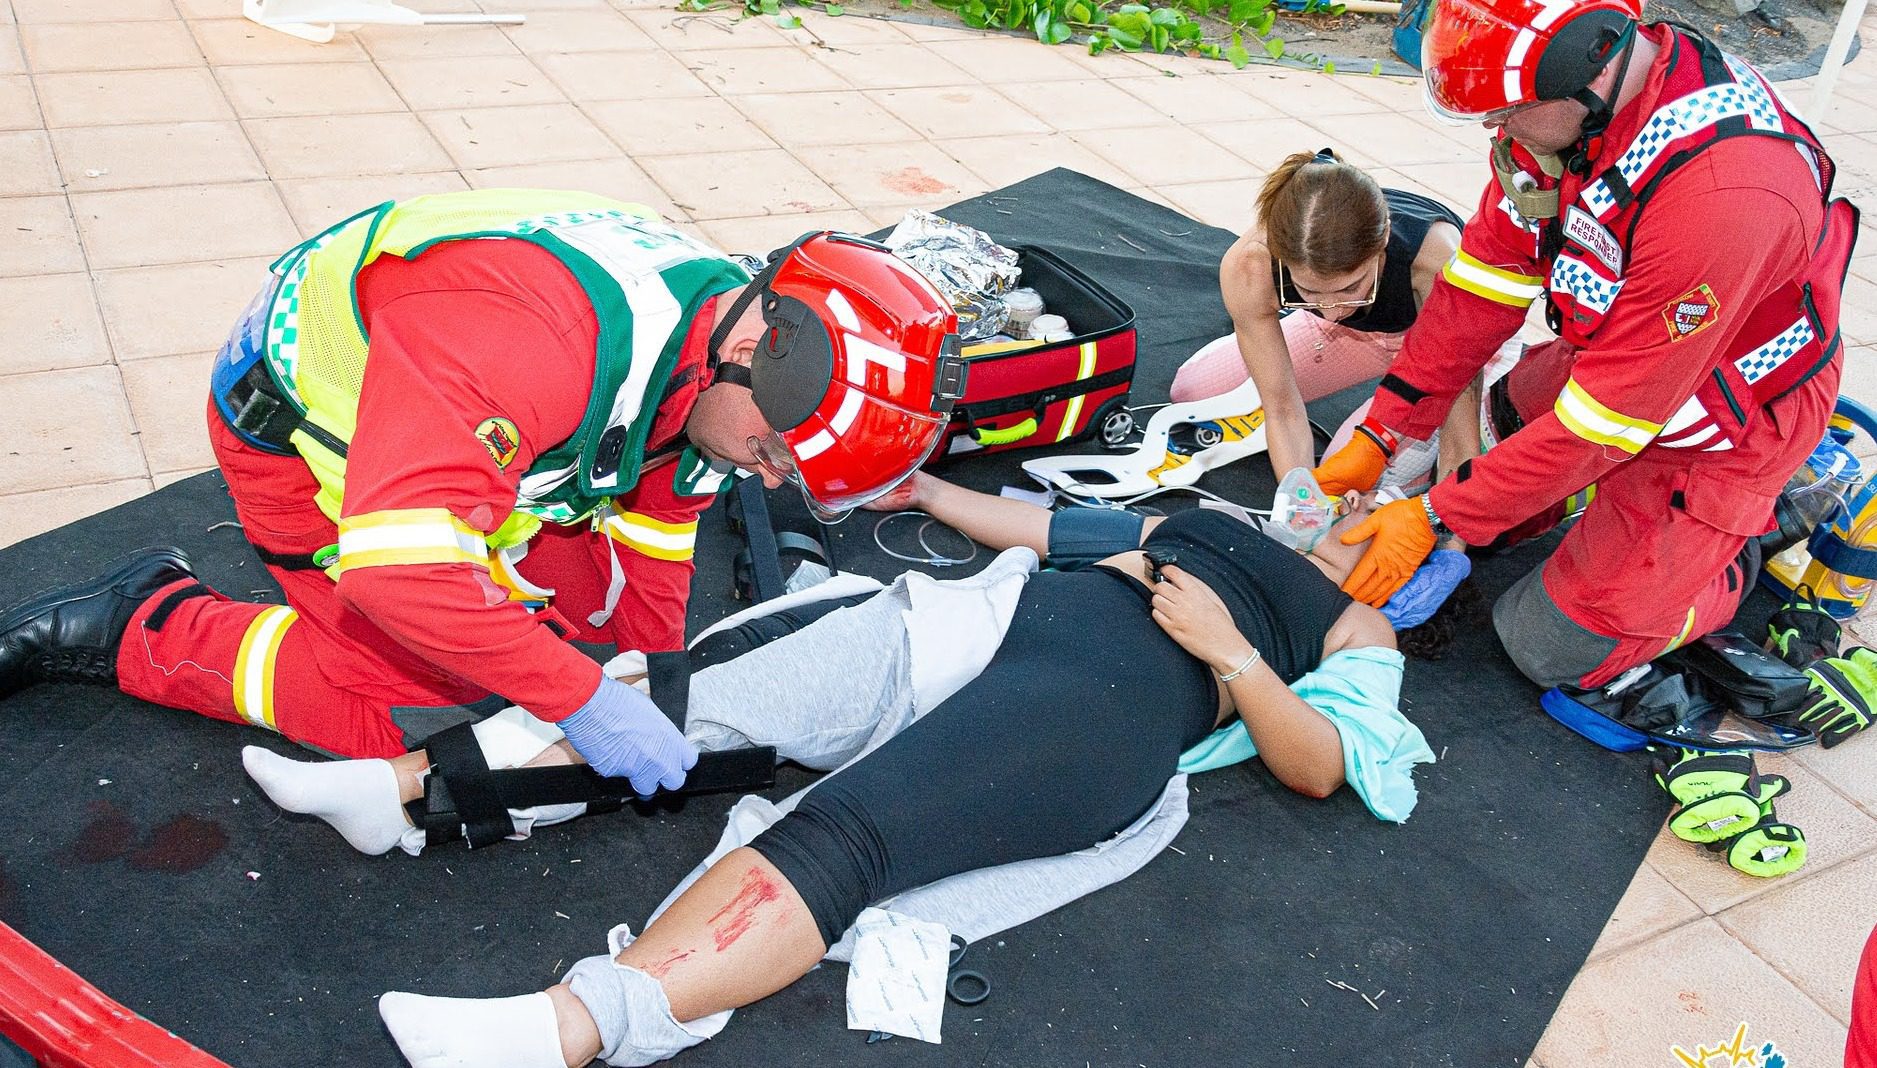 NATIONAL RESCUE & CPR CHALLENGE SET FOR MULLINGAR IN MAY